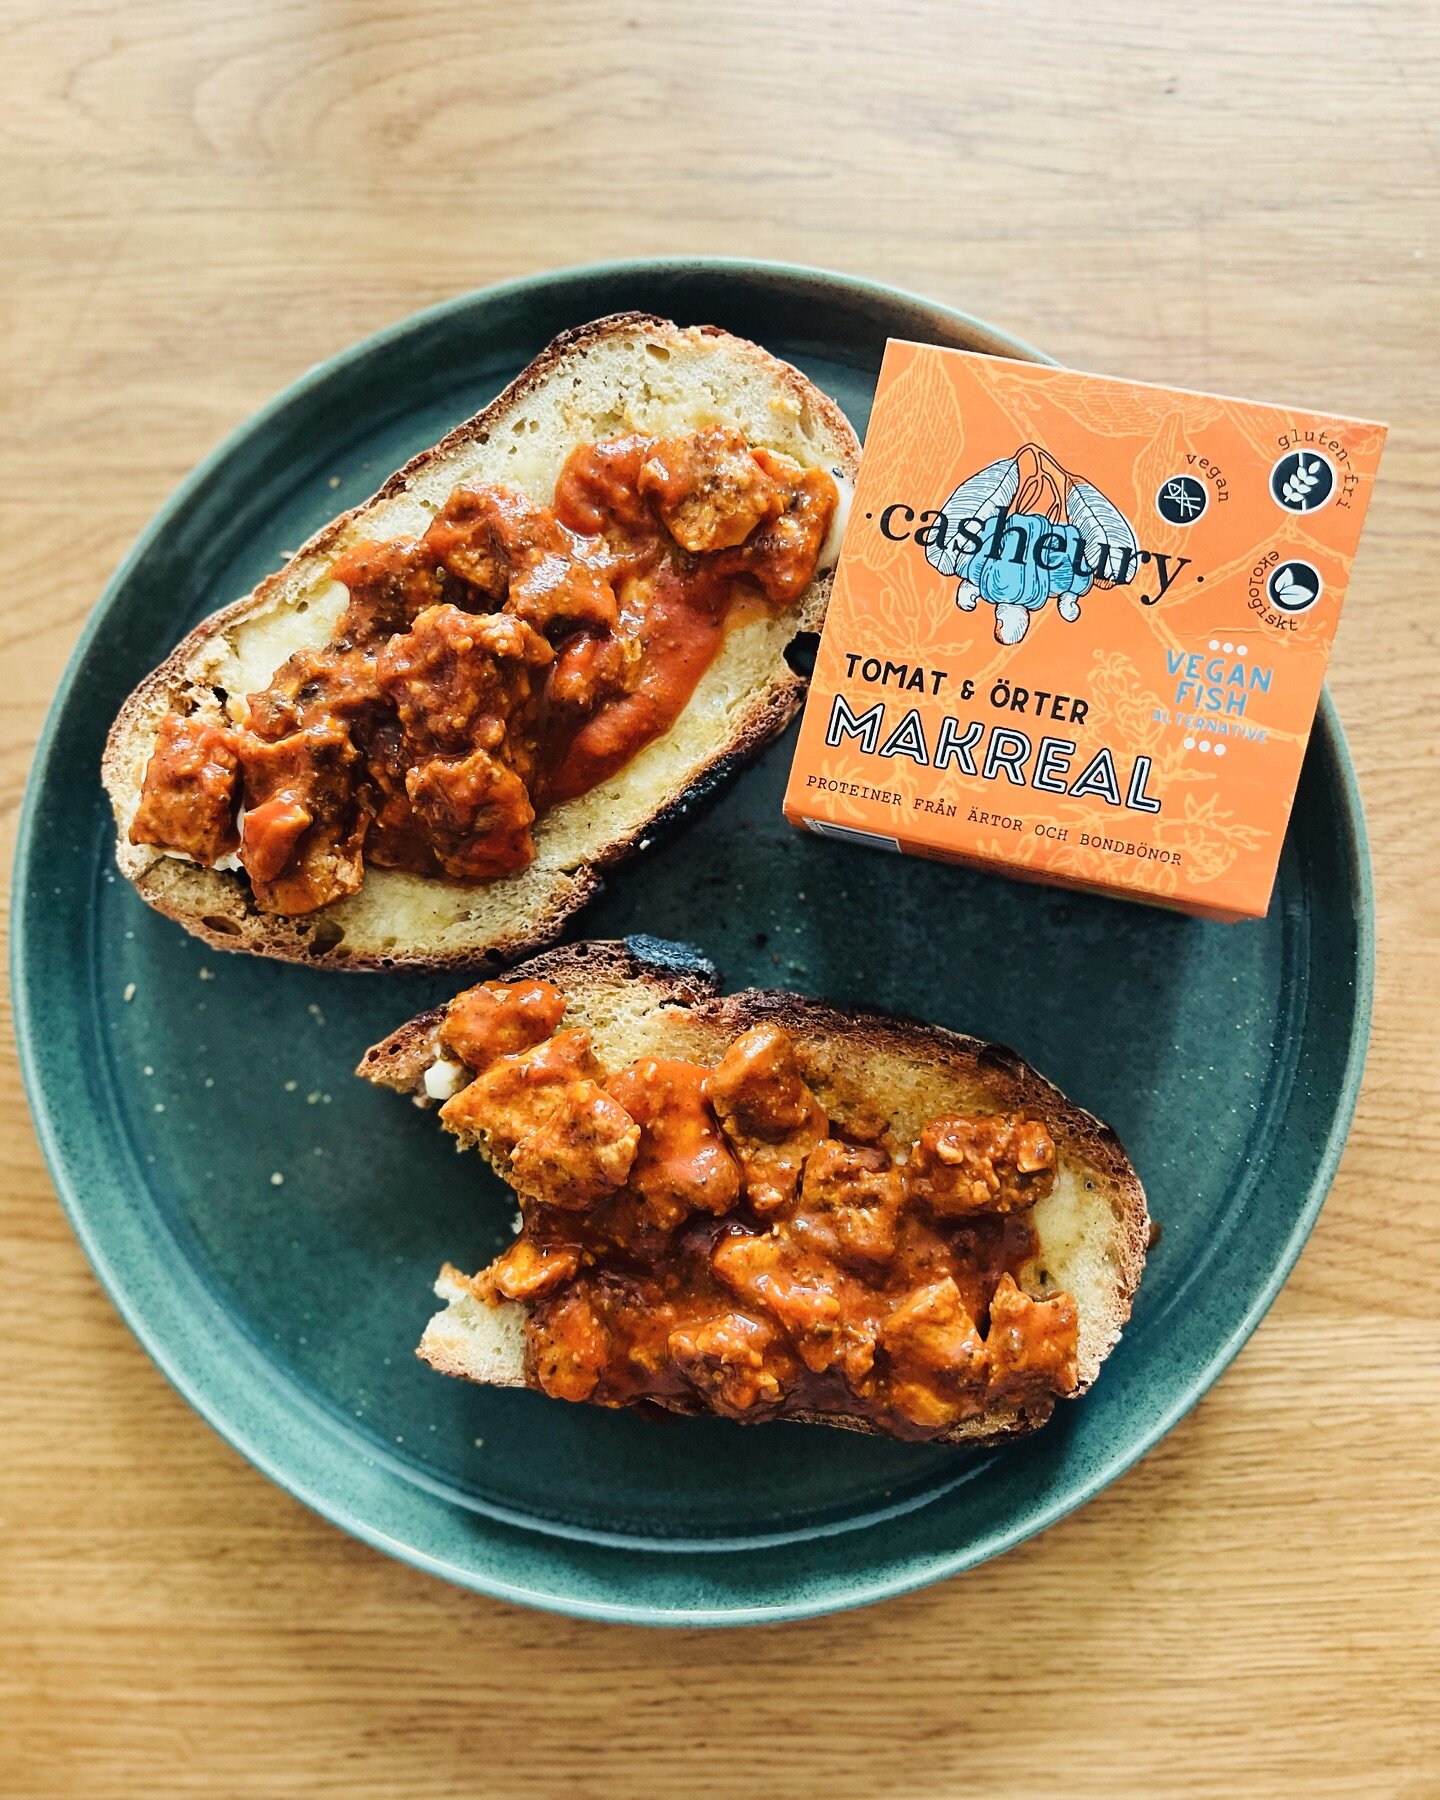 MAKREAL ON TOAST
A modern sustainable and ethical take on a classic savoury snack made even better with freshly home baked bread.

MAKREAL is based on Vegetable protein from peas and broad beans  in tomato sauce. Add it to a sandwich, salad or eat it